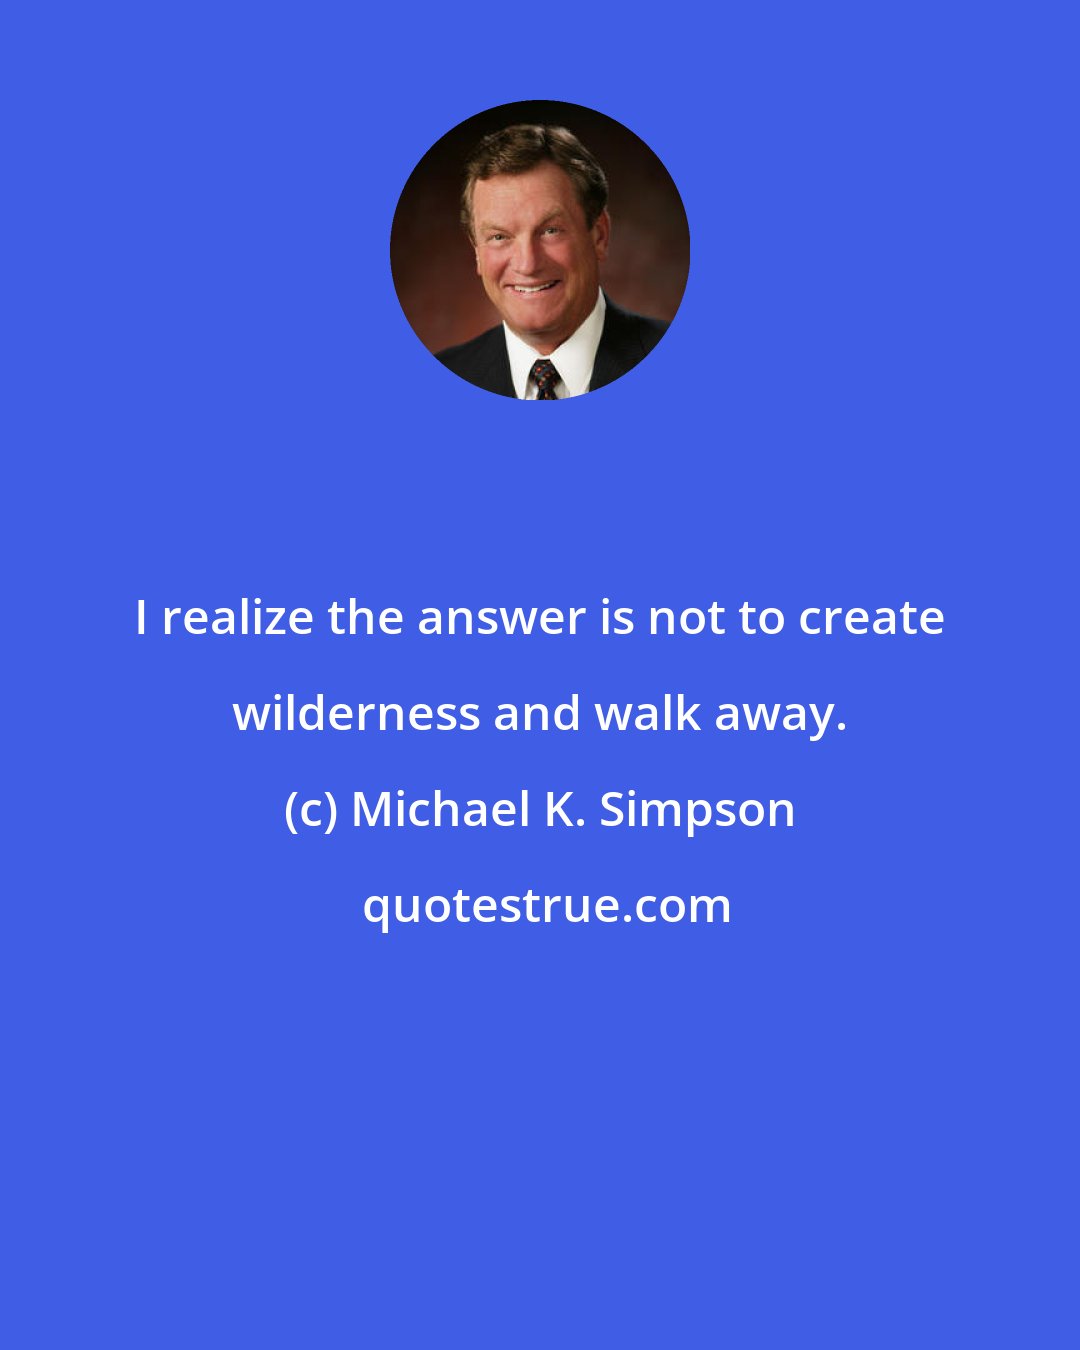 Michael K. Simpson: I realize the answer is not to create wilderness and walk away.